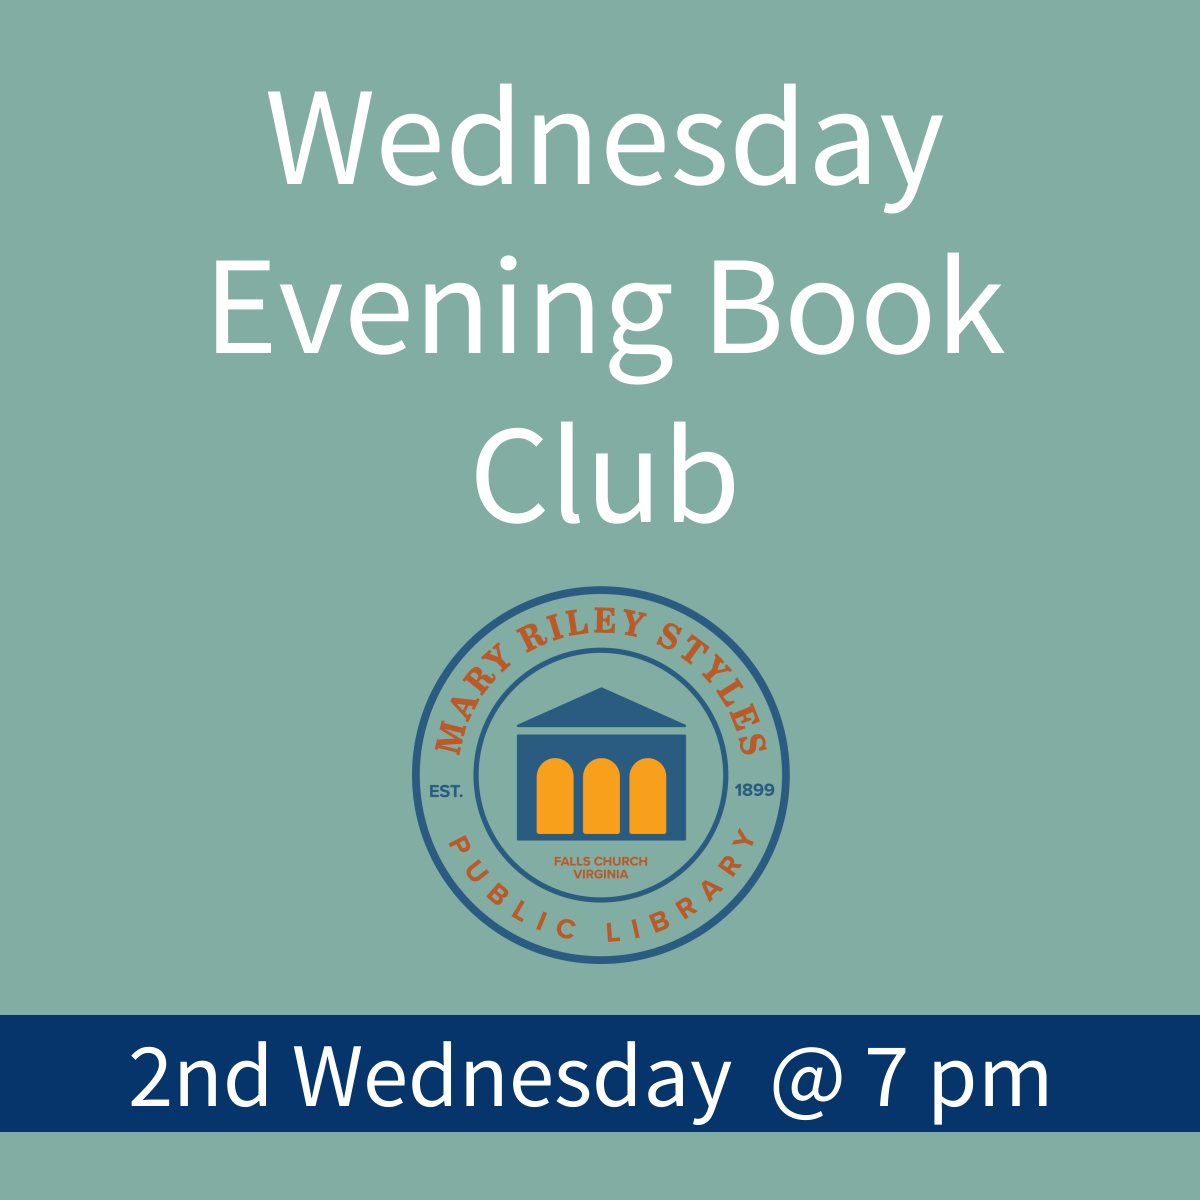 Wednesday Evening Book Club 2nd Wednesday at 7 pm